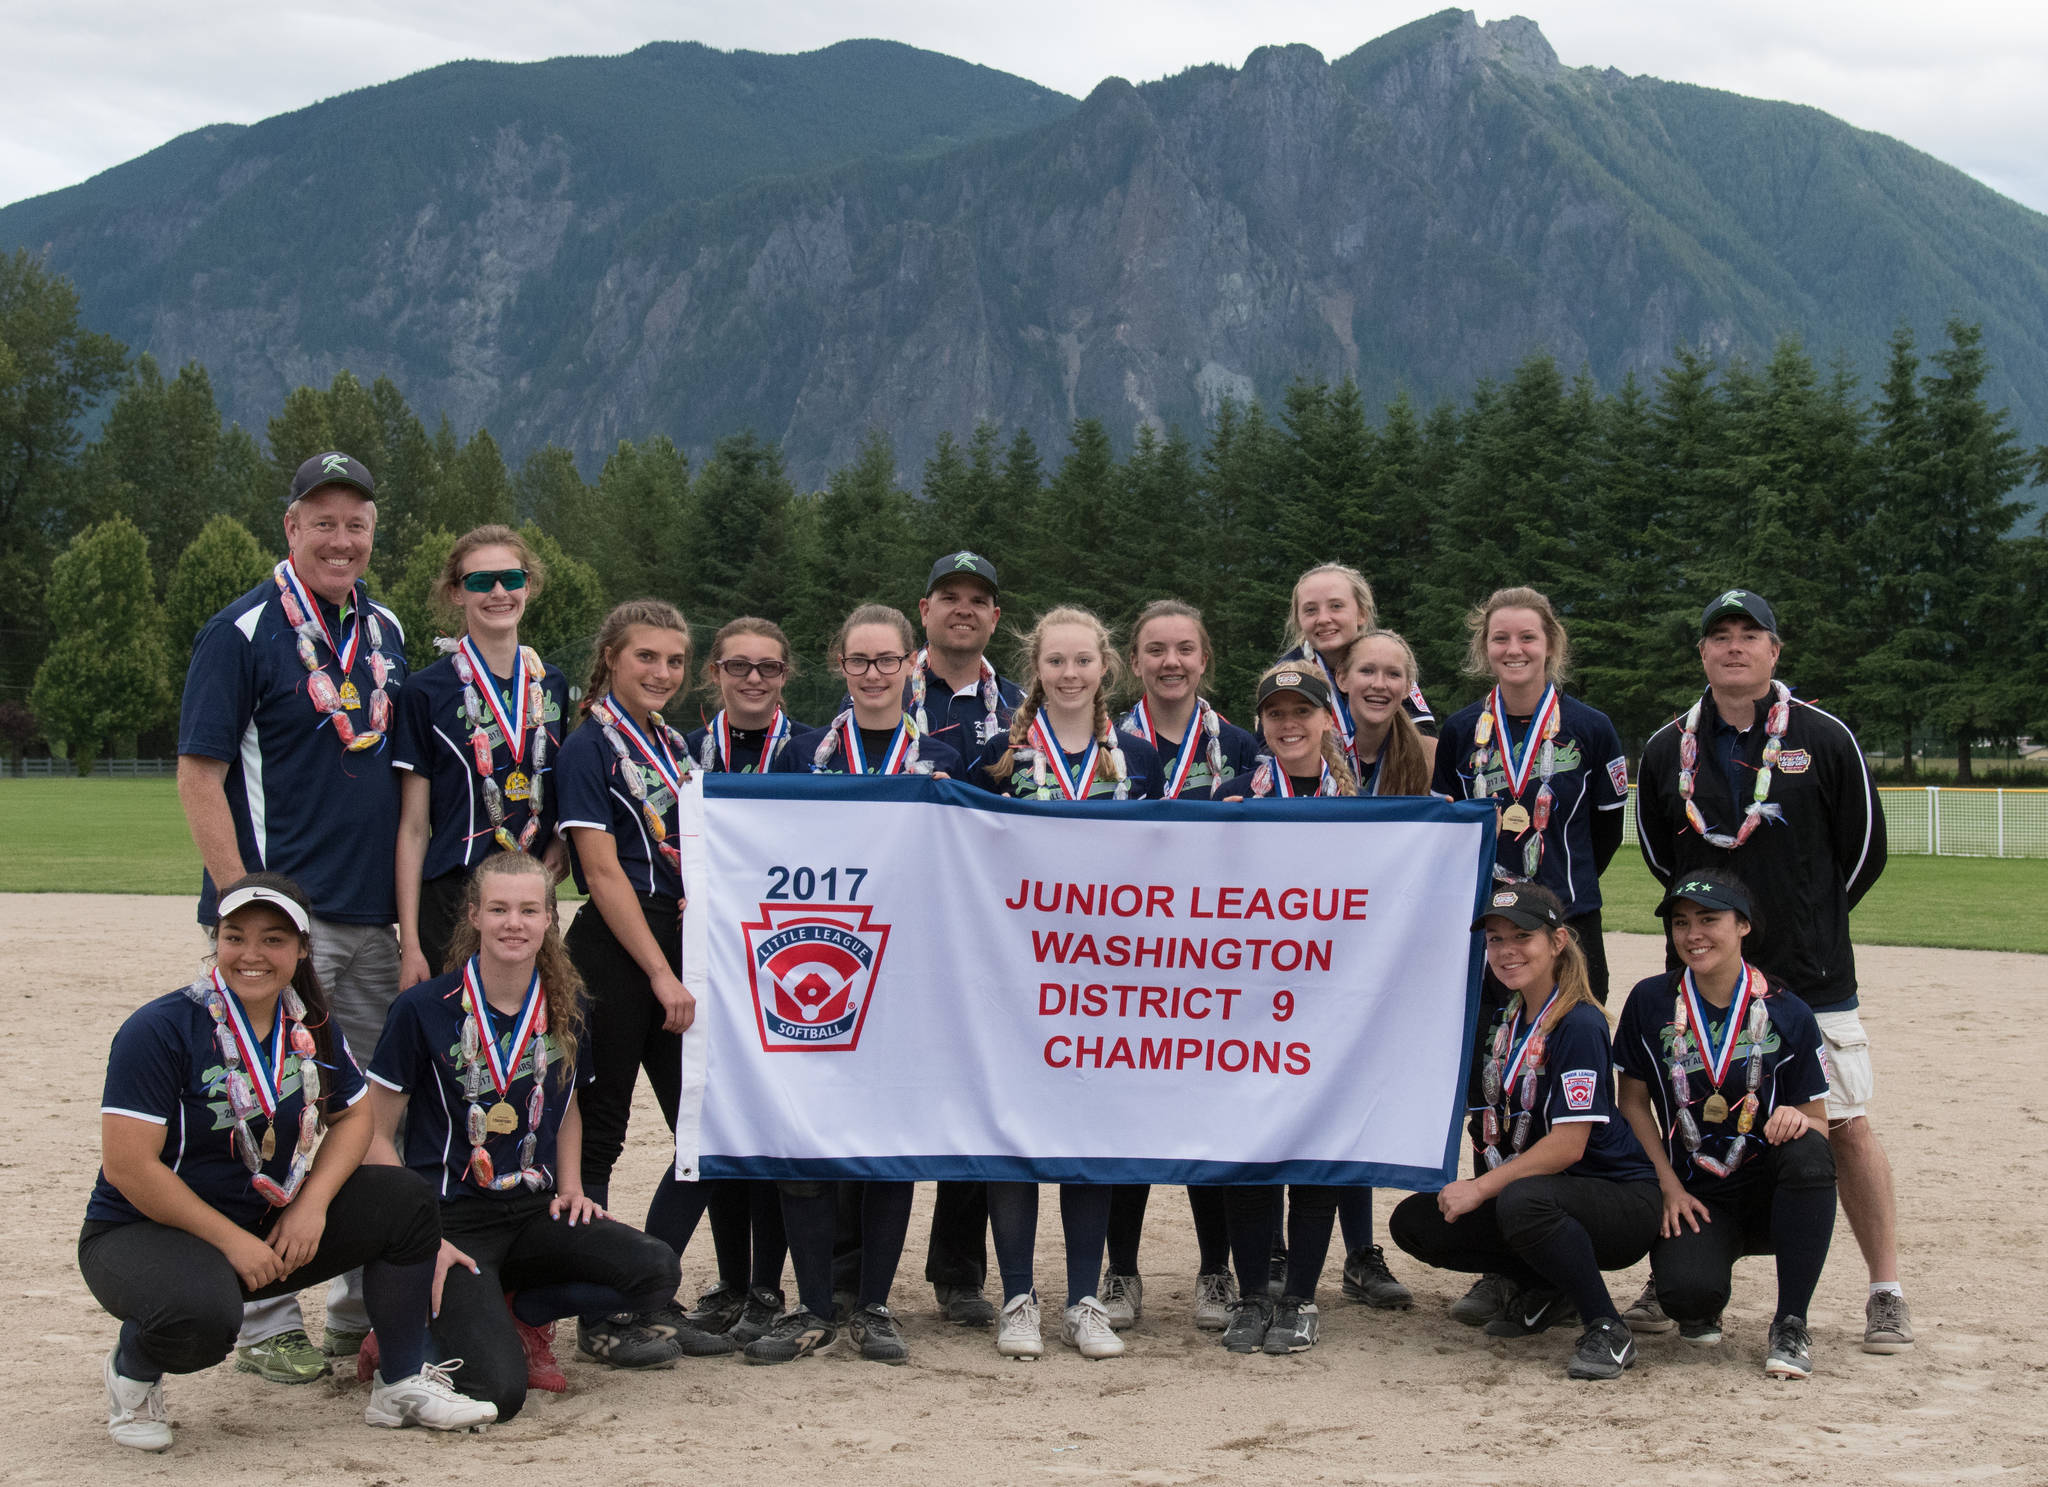 Kirkland’s junior all-star softball squad won the District 9 title. Back row standing left to right: Manager Mikal Norman, Antonia Norman, Ruby Olmstead, Ashley Allen, Mackenzie Burke, coach John Allen, Abbie Reynolds, Lilly Bean, Haley Brown, Claire Towey, Kaia Bradford, Anna Fridell and coach Shane Reynolds. Front row squatting left to right: Maliena Carelli, Kaci Gordon, Maddy Miller and Amy Chen. Courtesy photo